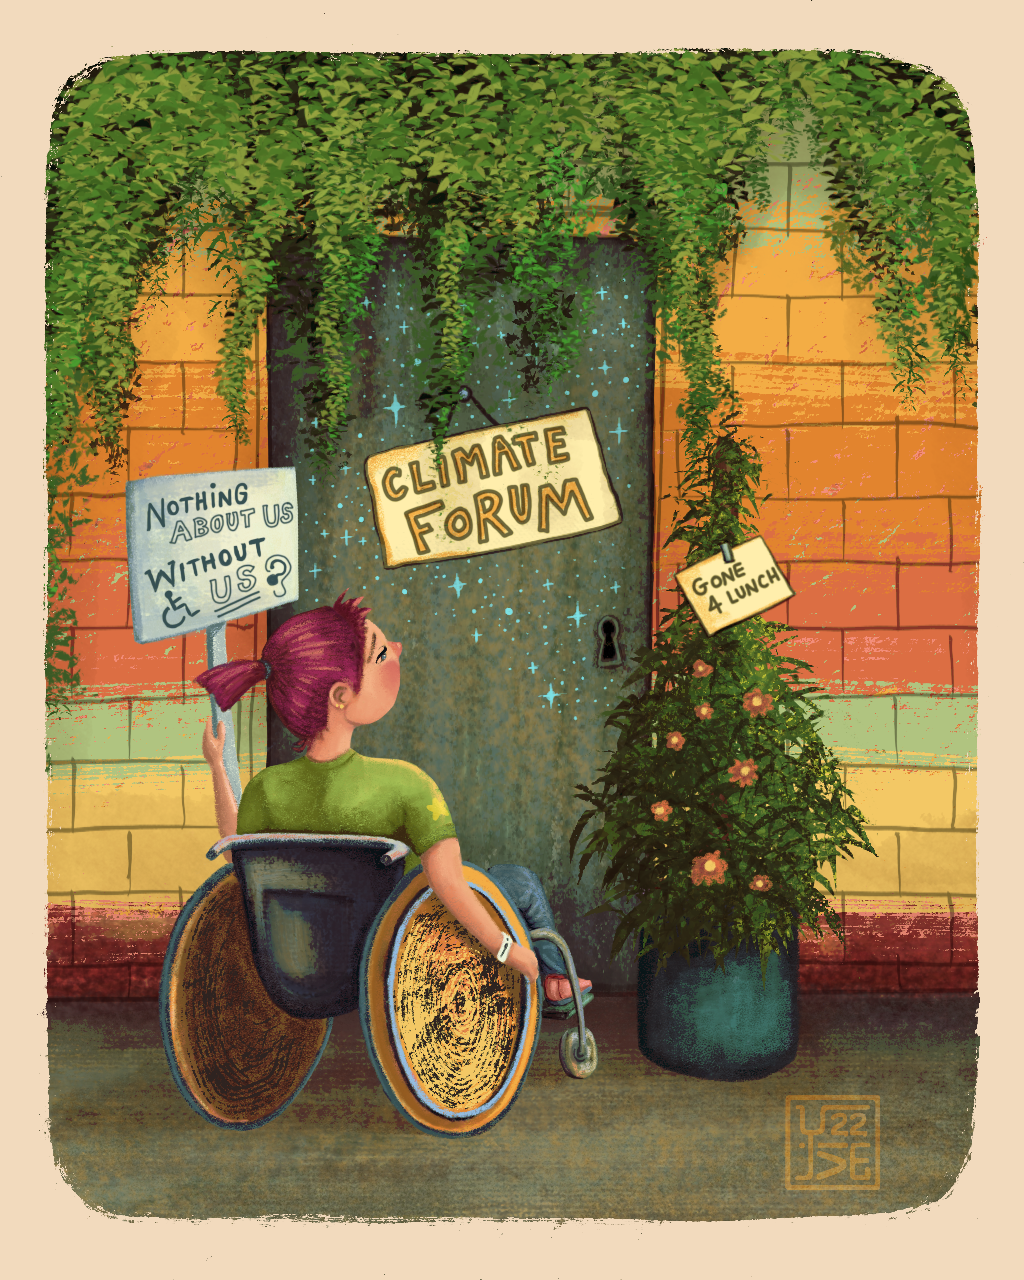 Illustration: A person with burgundy colored hair, wearing a green top and blue pants is sitting on a wheelchair, holding a white color board with blue text that says, “Nothing about us, without us” in all caps. There are symbols of a wheelchair user and an ear with a hearing aid on it. The person is facing a closed door that is greyish blue in color and has the twinkling stars in light blue like in the previous illustration. The door has a pale-yellow board hung on it that says “climate forum”